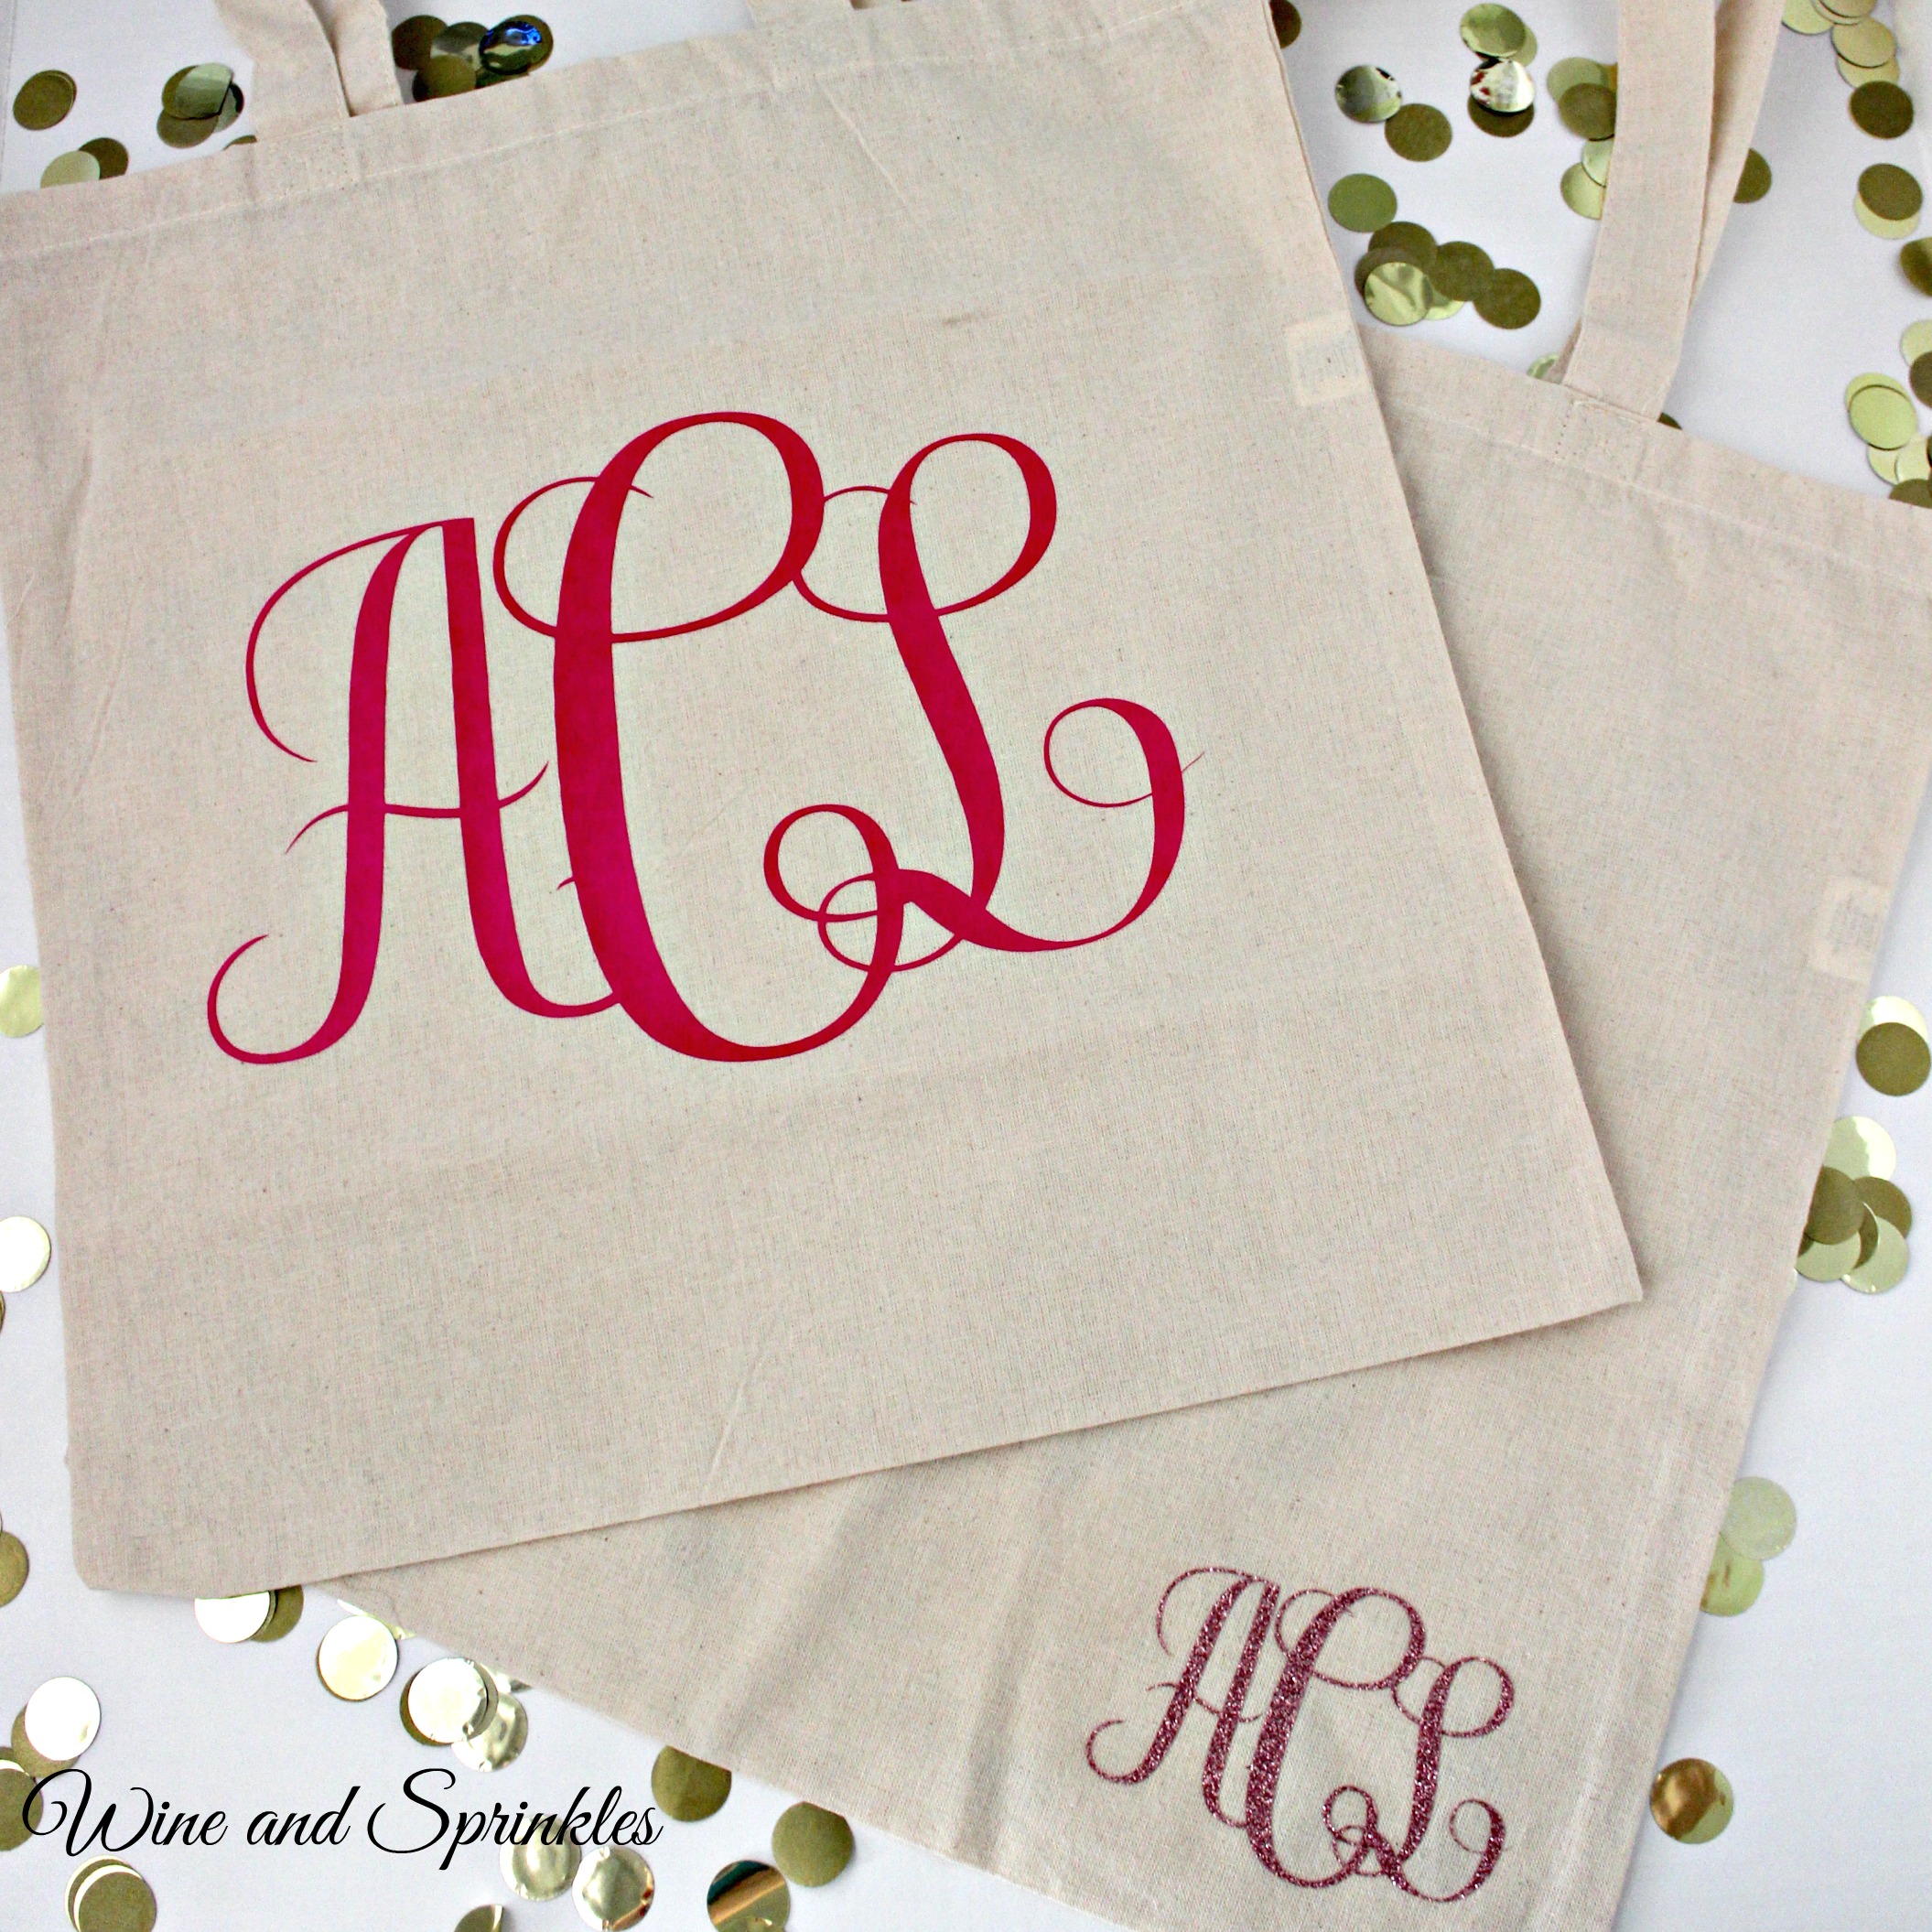 Name Meaning Monogram Personalized Large Canvas Tote Bag